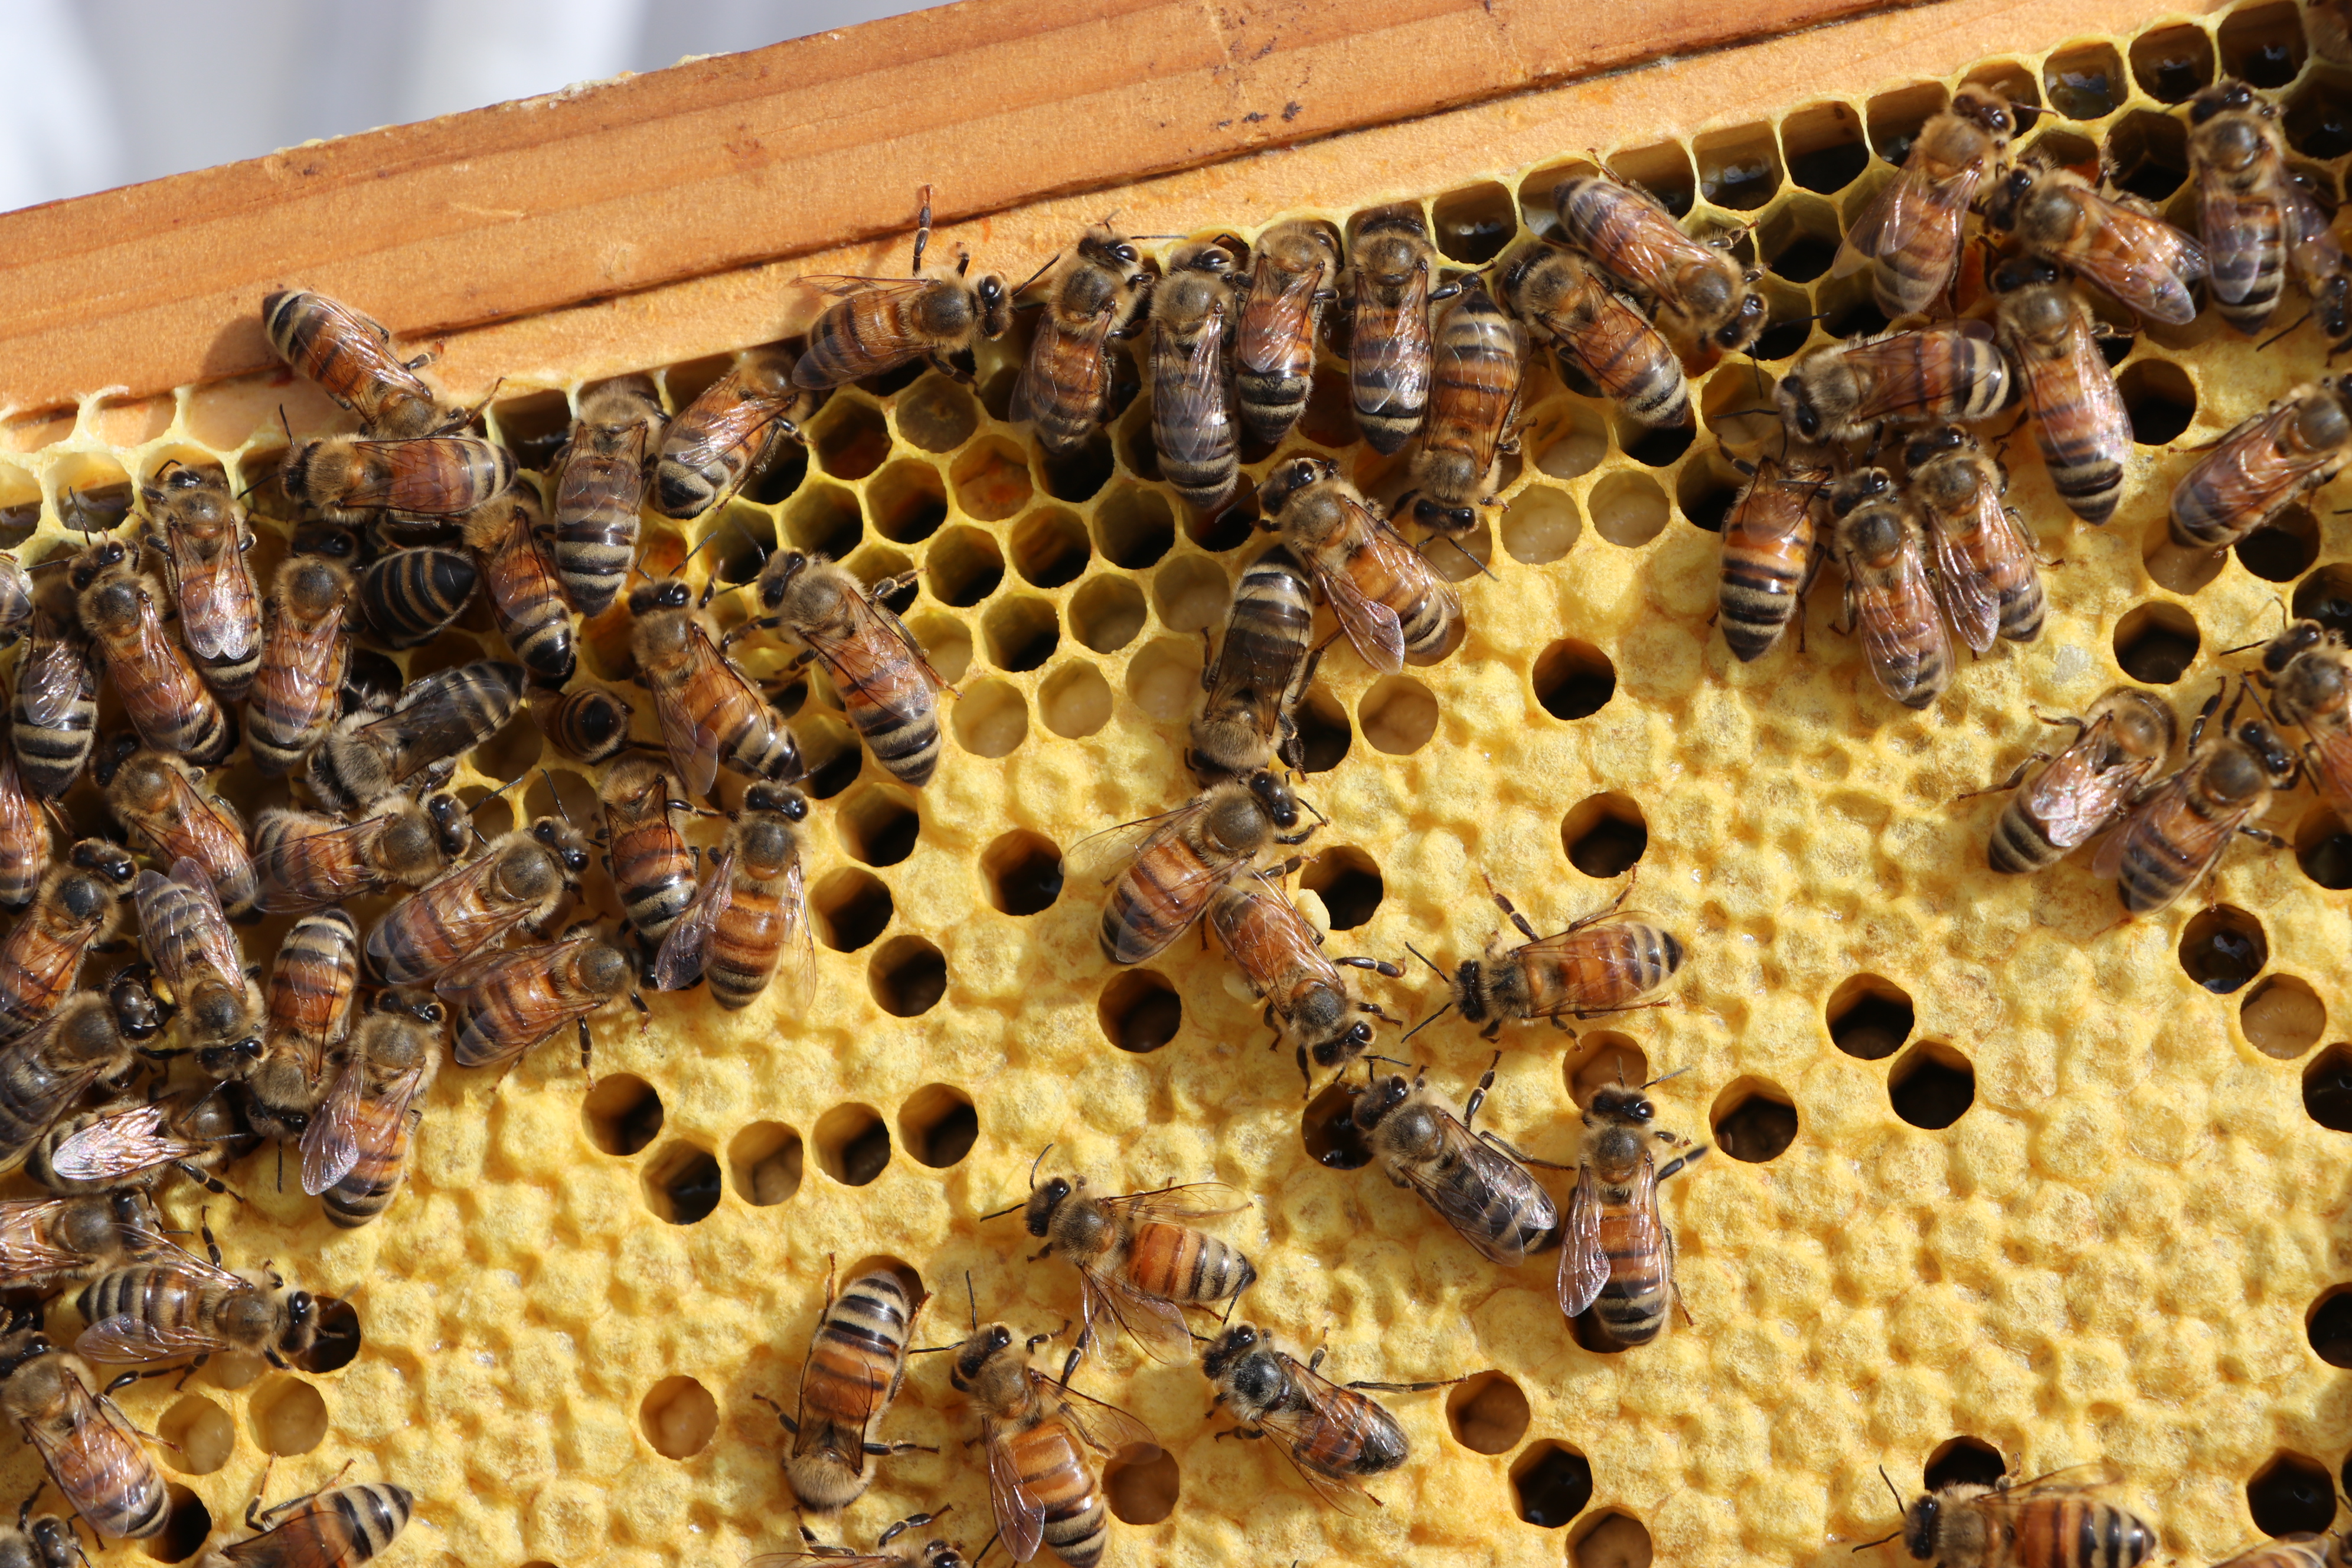 Worker bees and honey